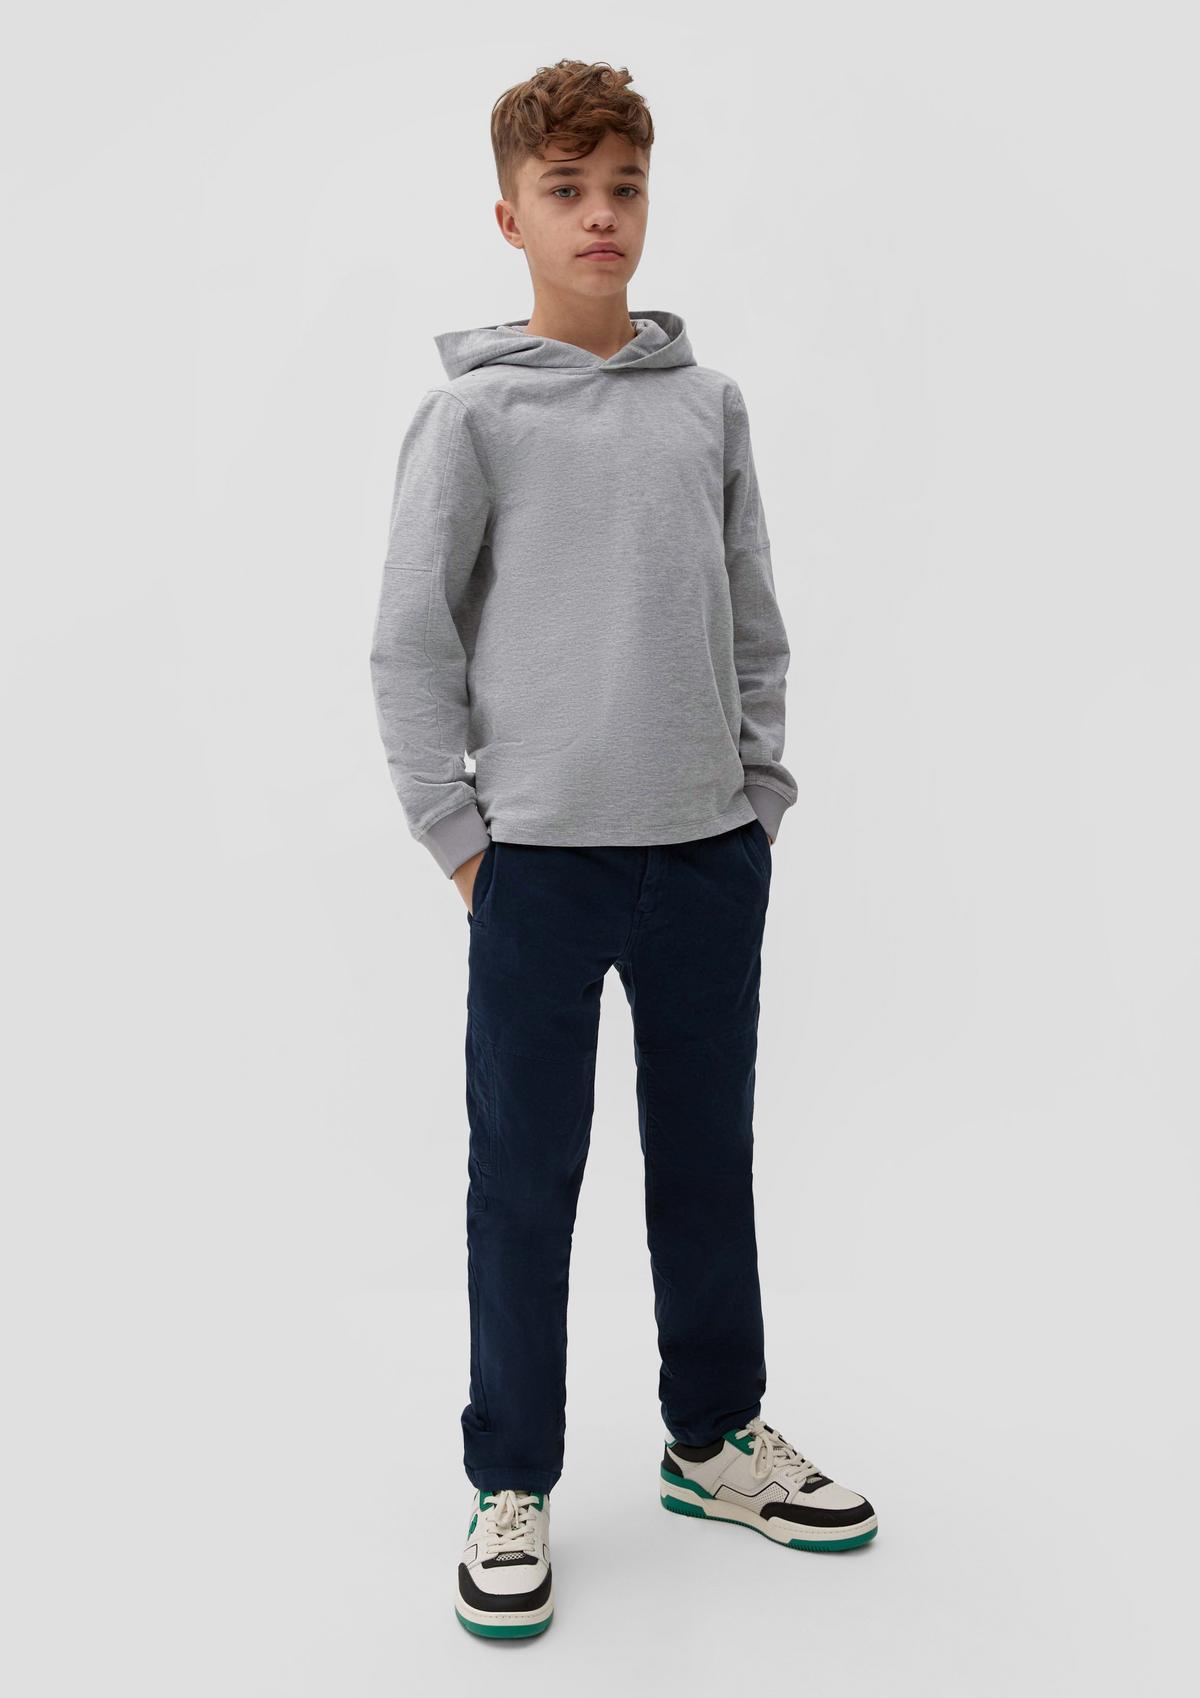 s.Oliver Hooded sweatshirt with a dividing seam